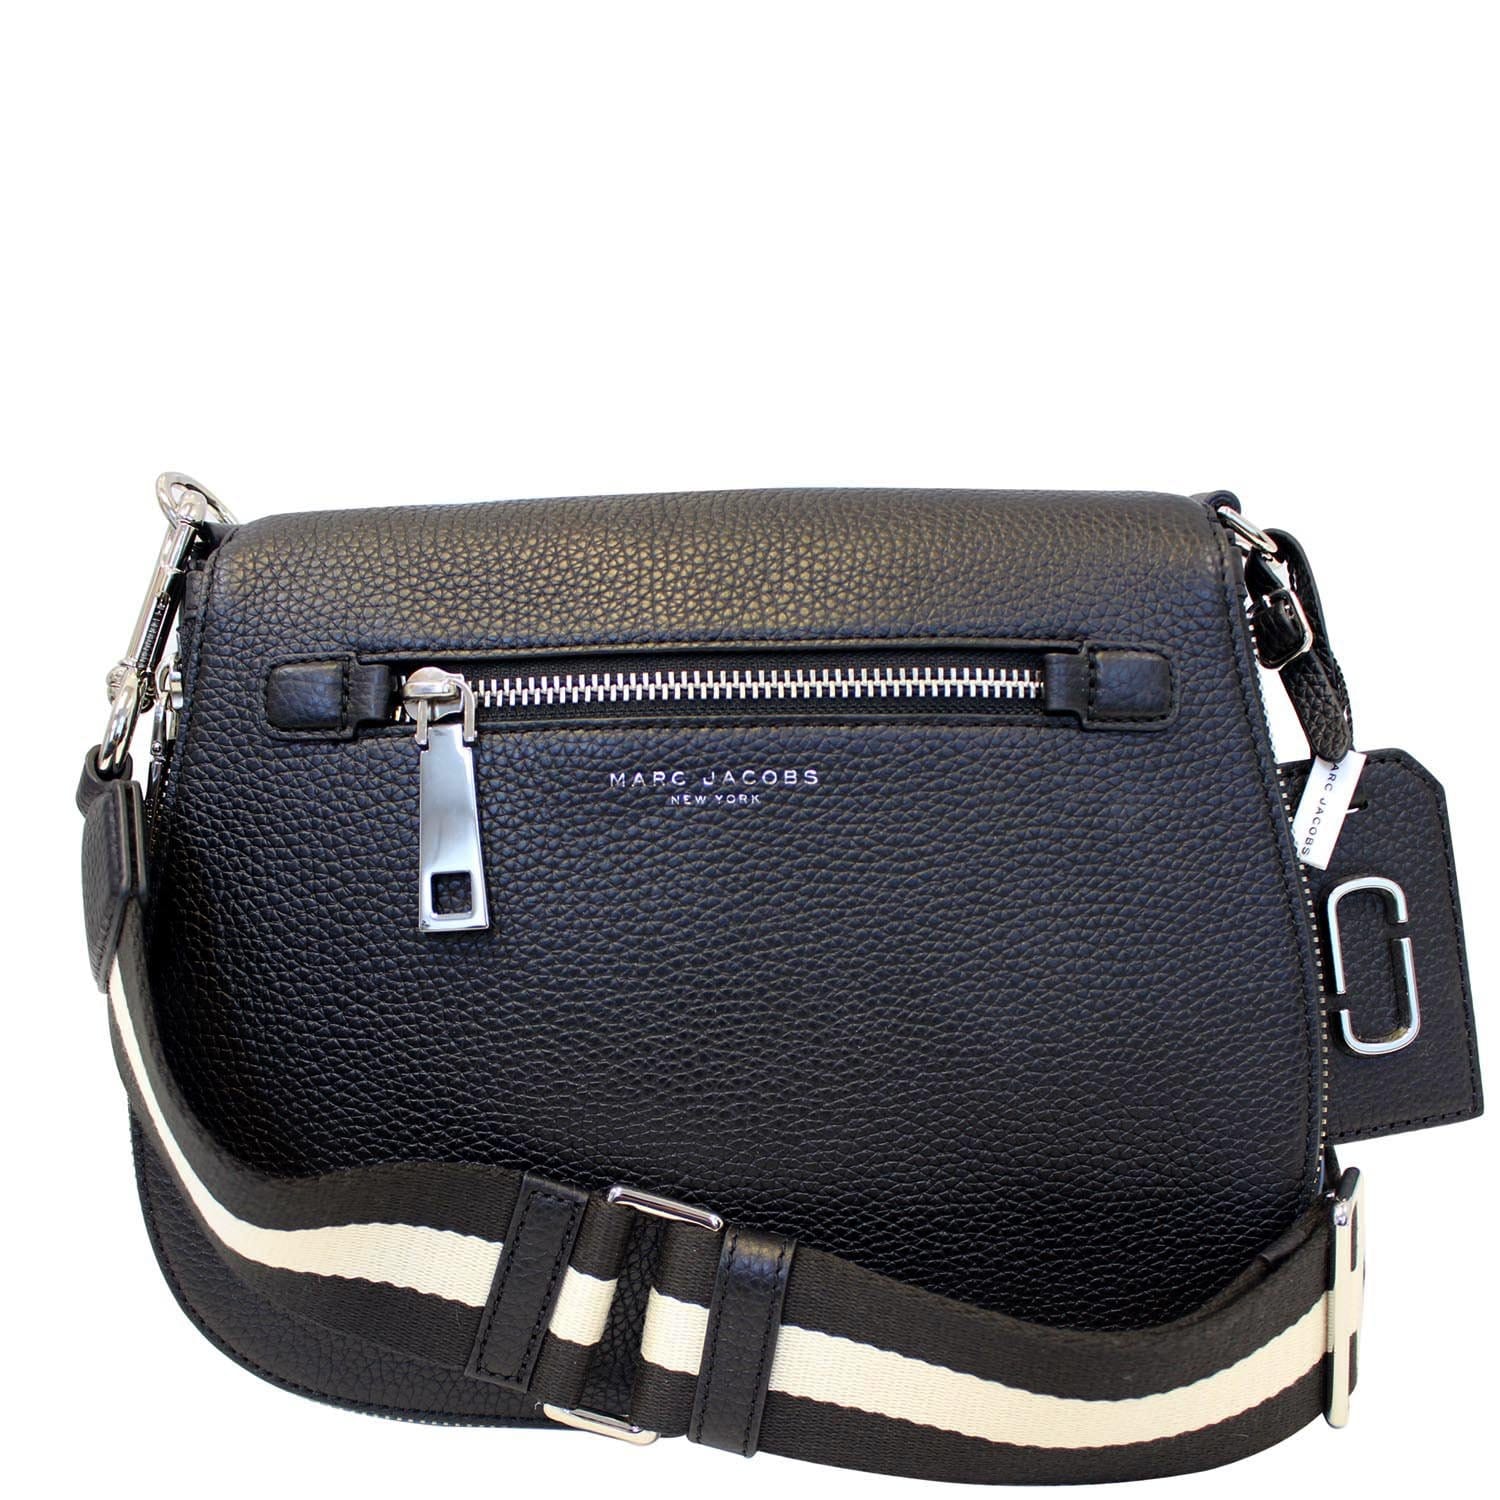 Crossbody Designer By Marc Jacobs Size: Small